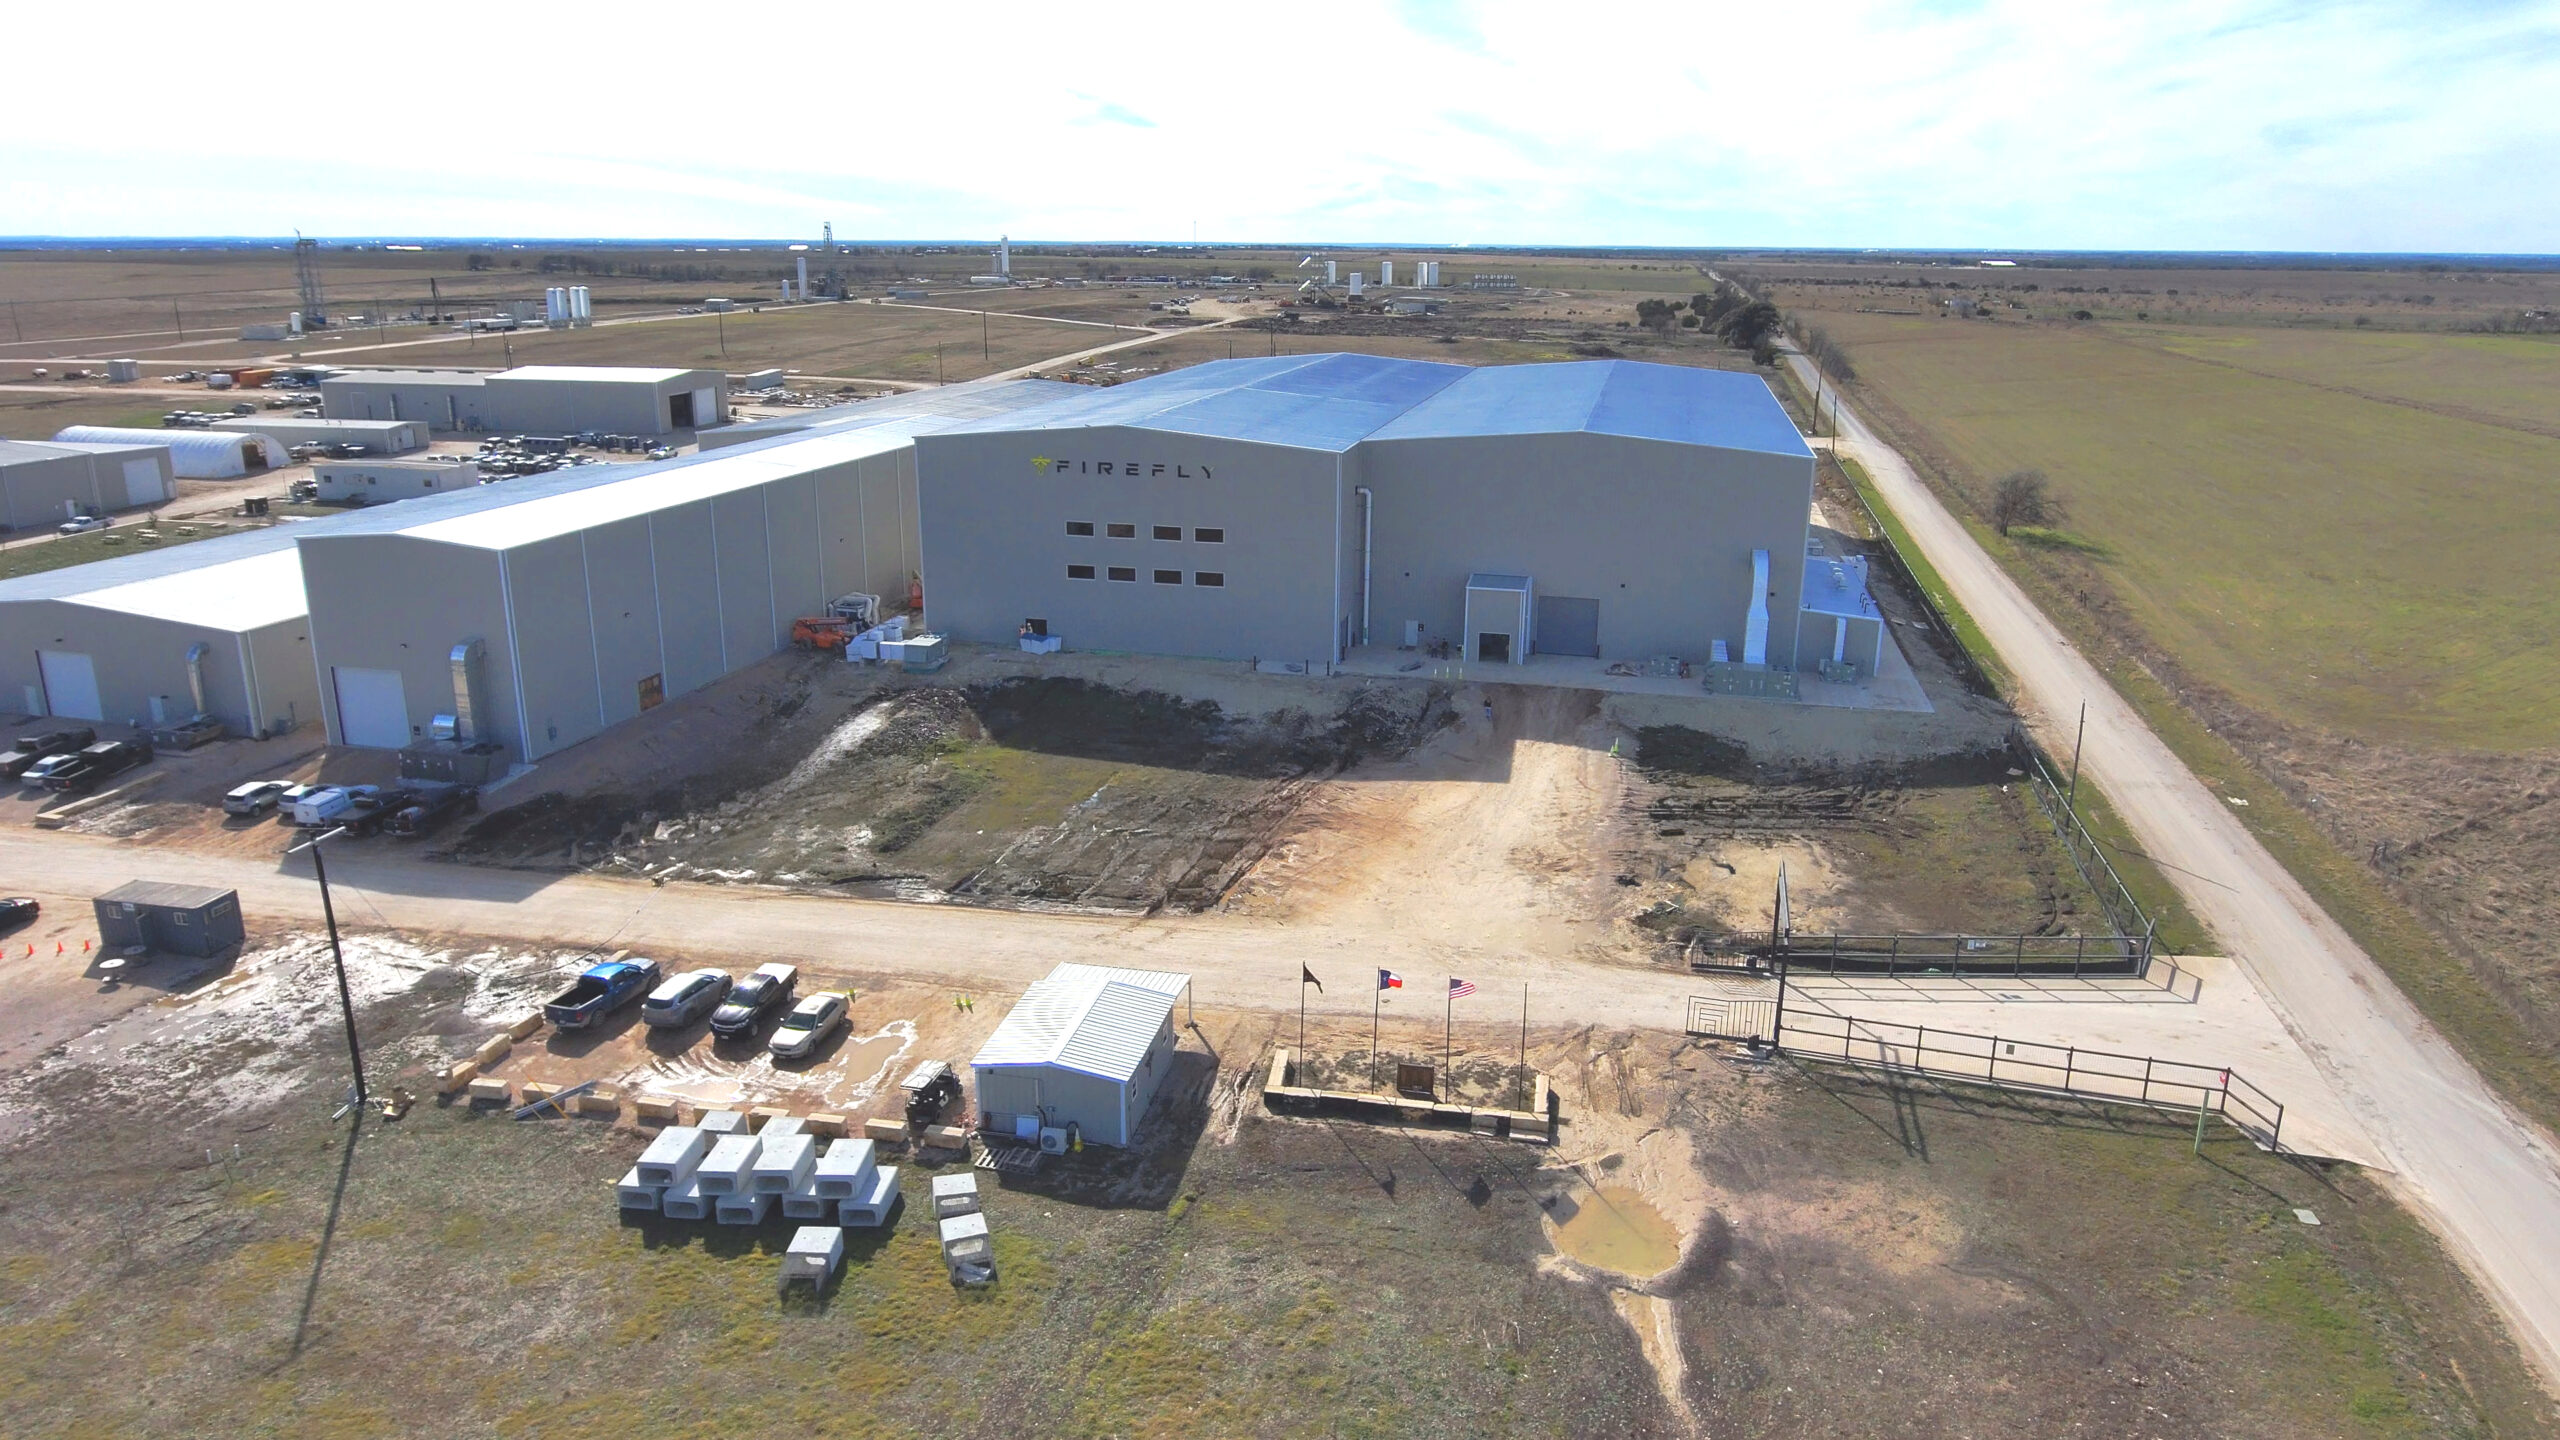 Firefly’s new MLV manufacturing and integration building